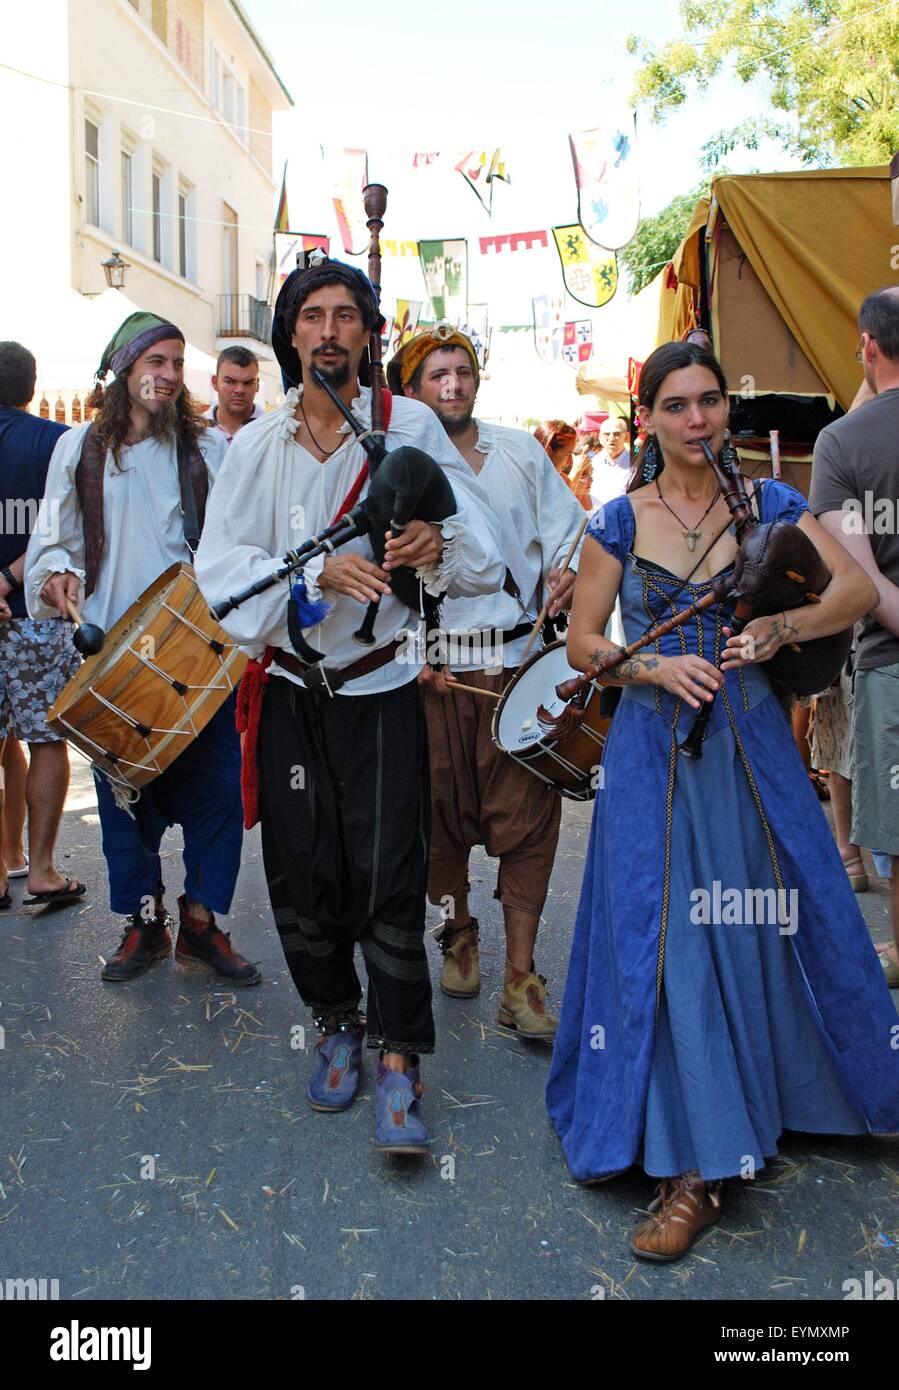 Medieval musicians at the Medieval market, Barbate, Cadiz Province, Andalusia, Spain, Western Europe. Stock Photo